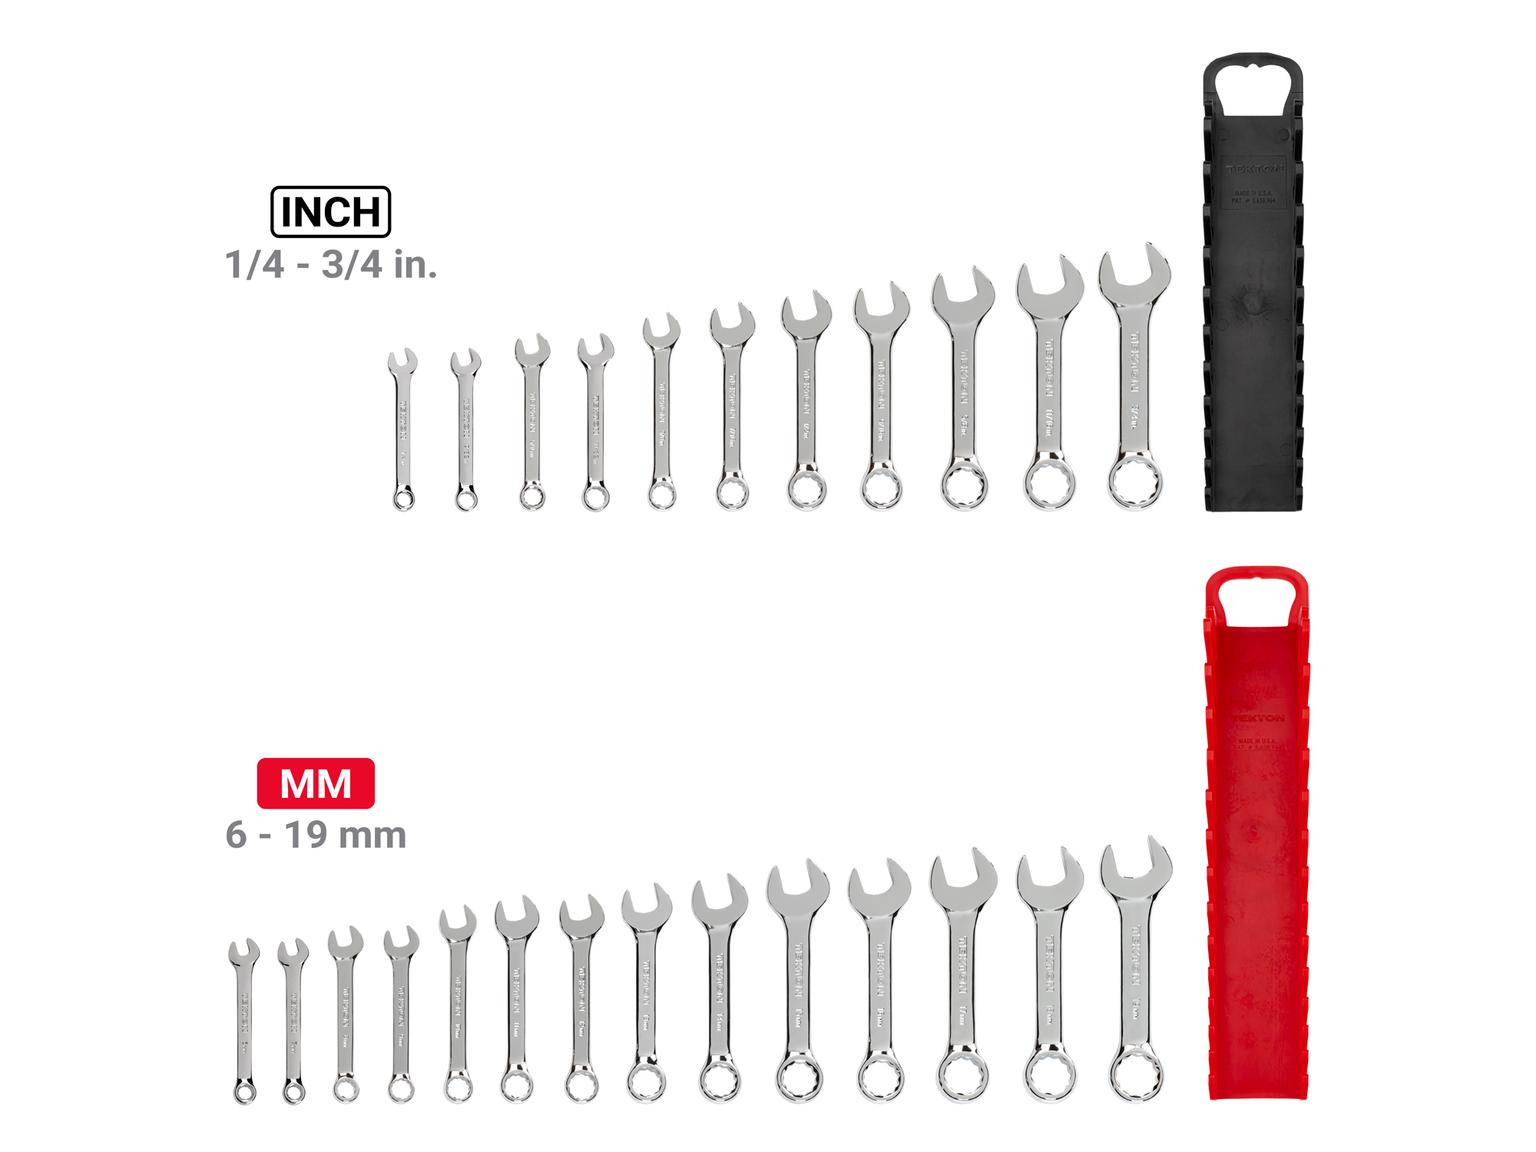 TEKTON WCB92403-T Stubby Combination Wrench Set with Holder, 25-Piece (1/4 - 3/4 in., 6 - 19 mm)